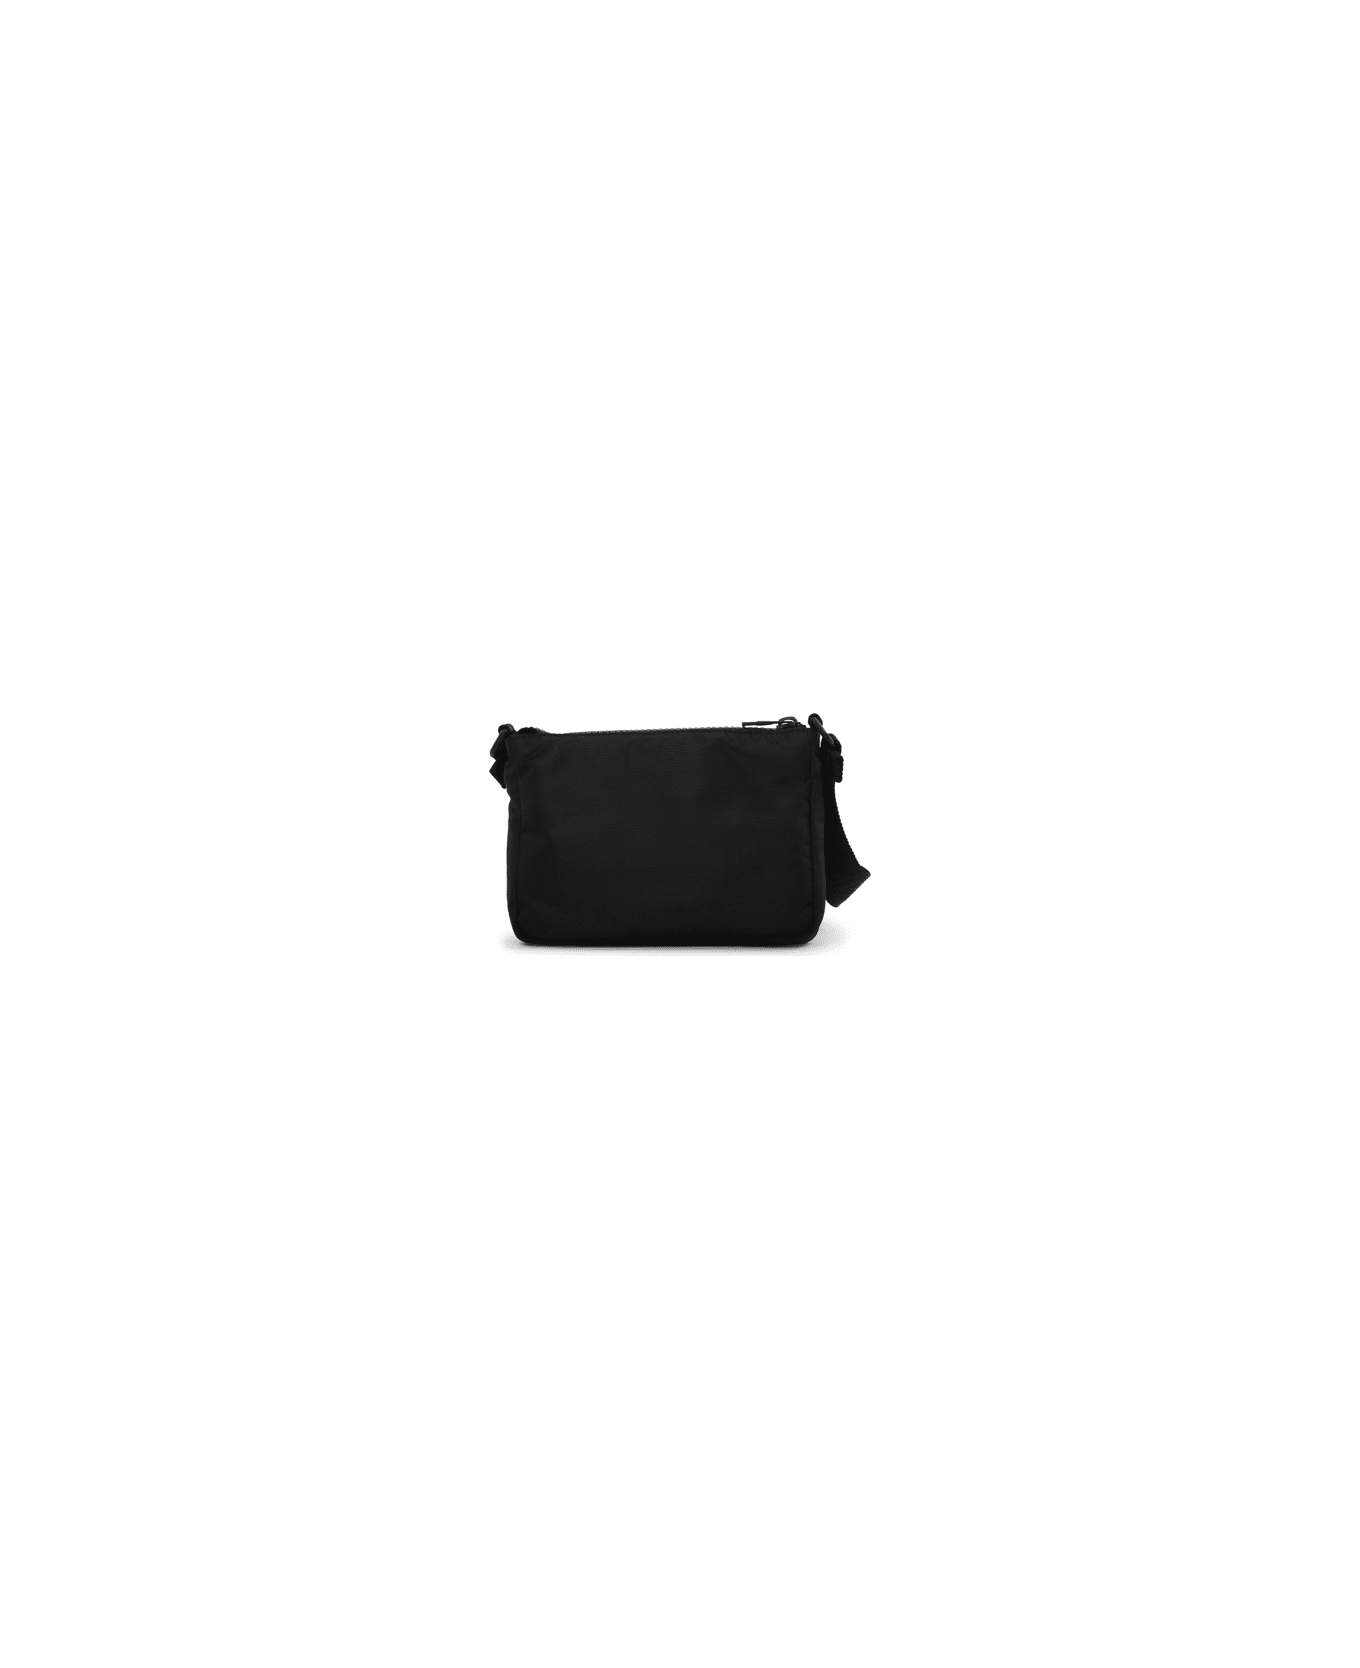 Alexander McQueen Shoulder Bag In Nylon With Blake Painted Logo In Contrast - Black/ white ショルダーバッグ